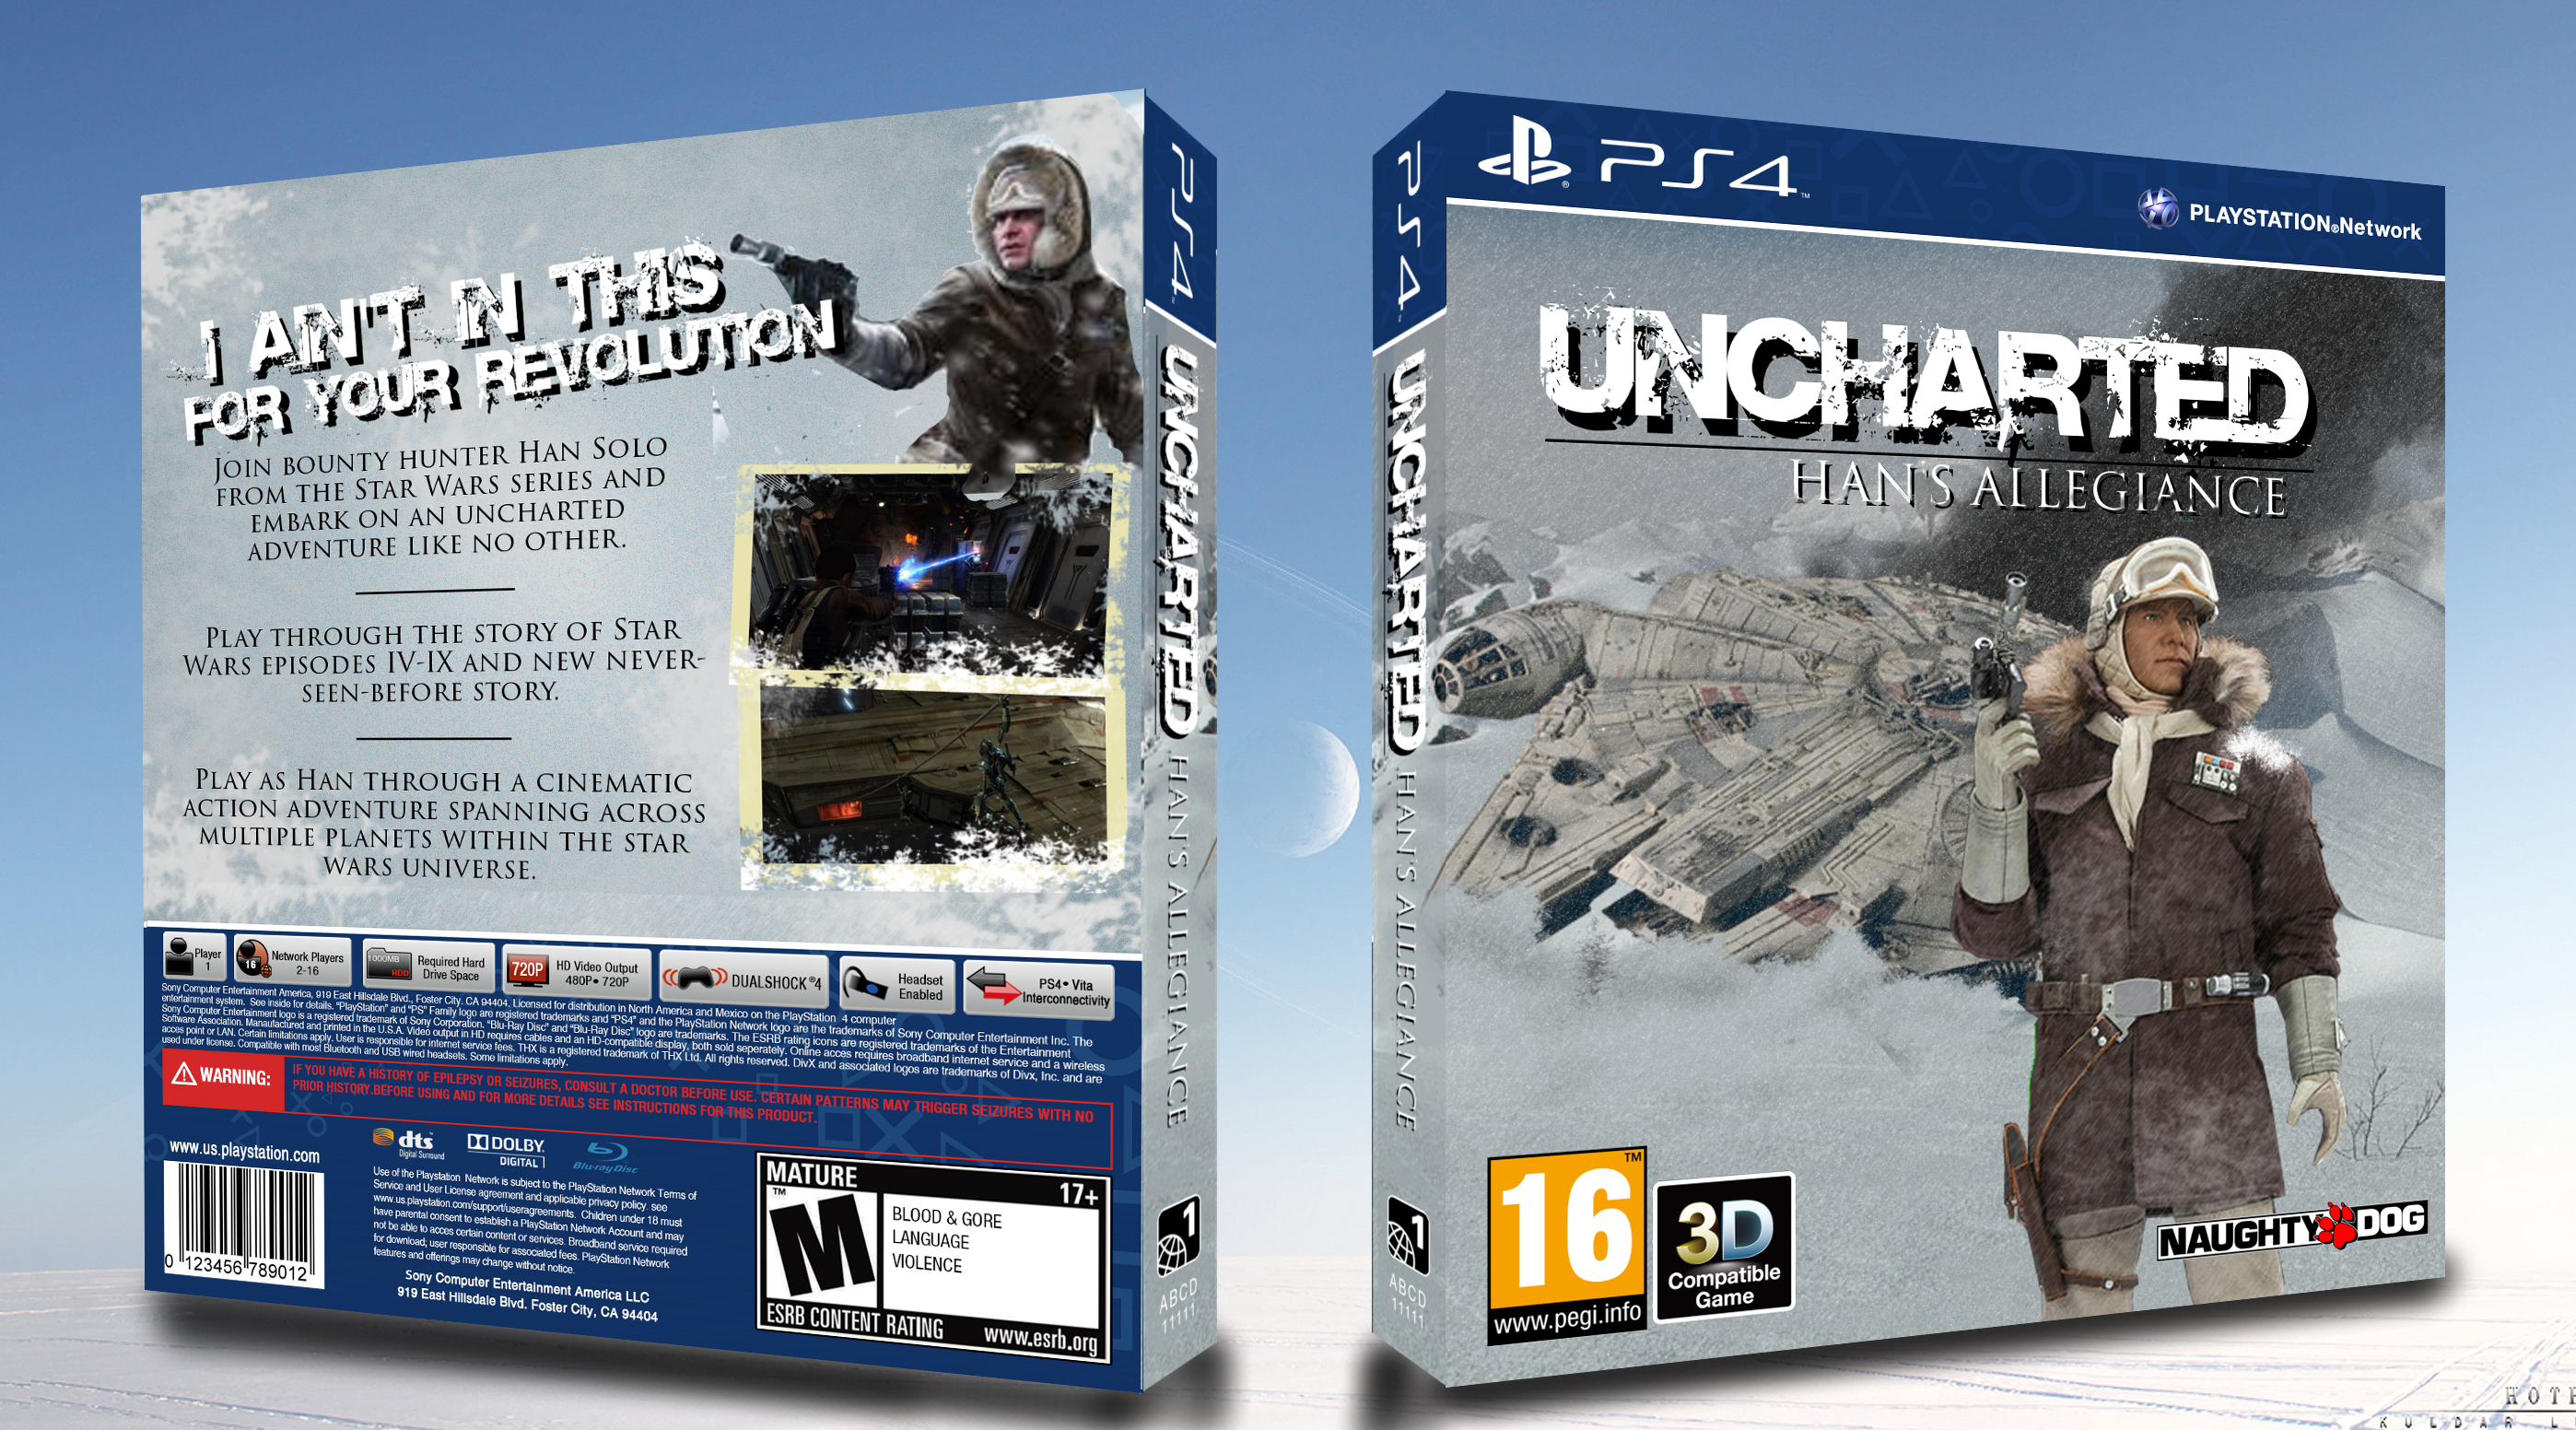 Uncharted: Han's Allegiance box cover